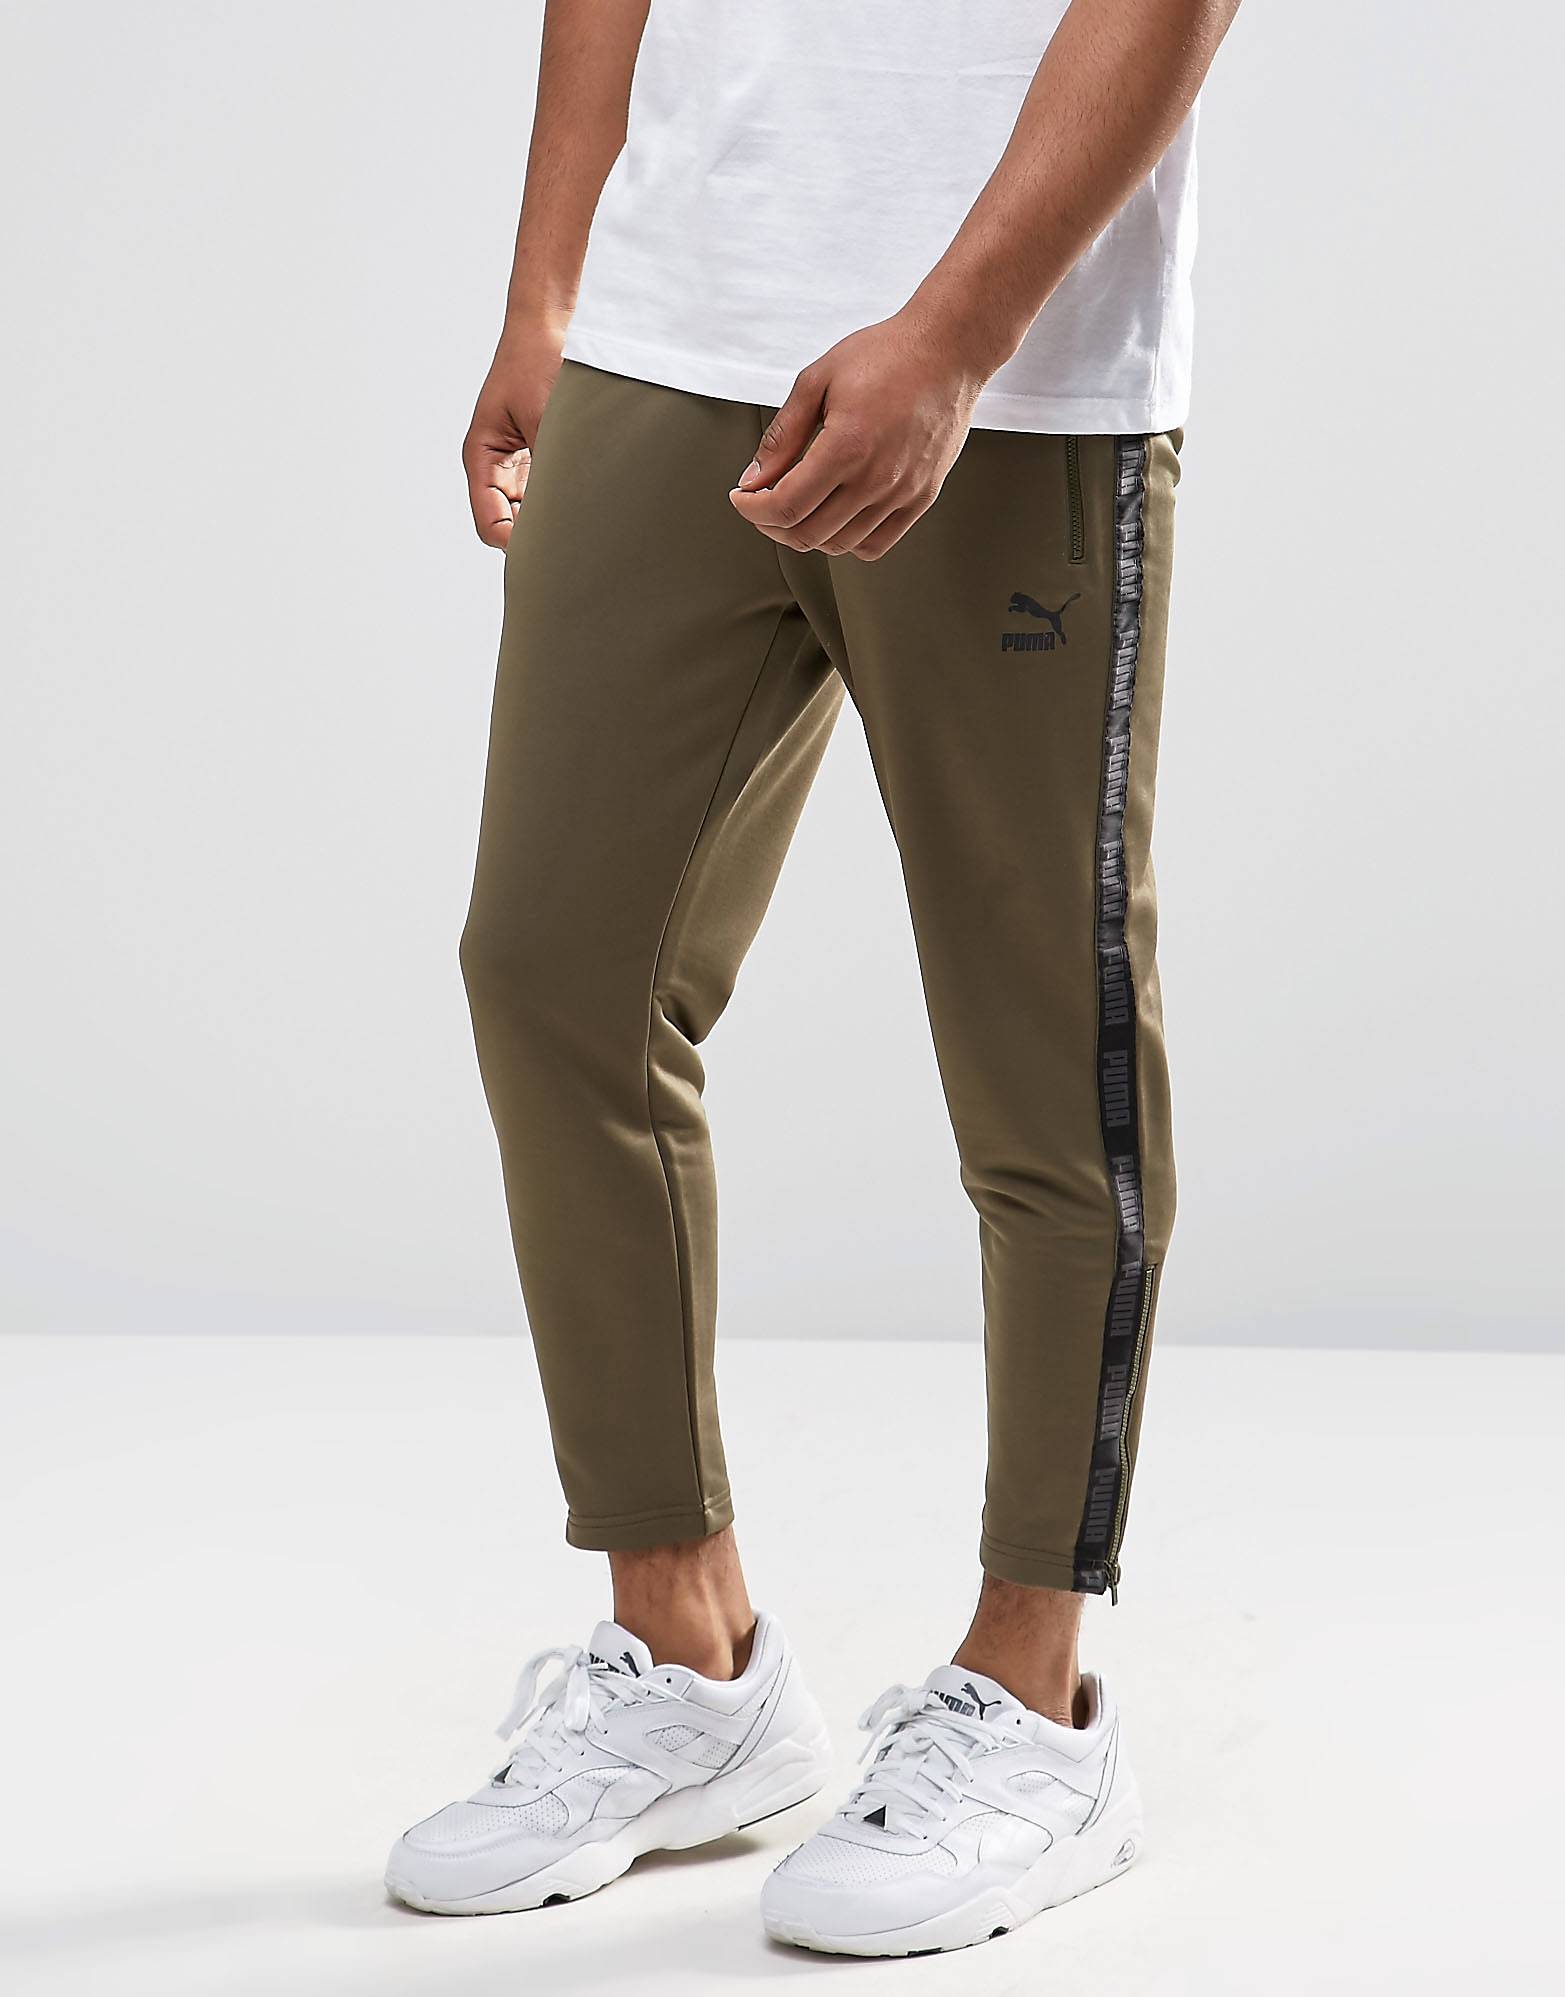 Forest green joggers